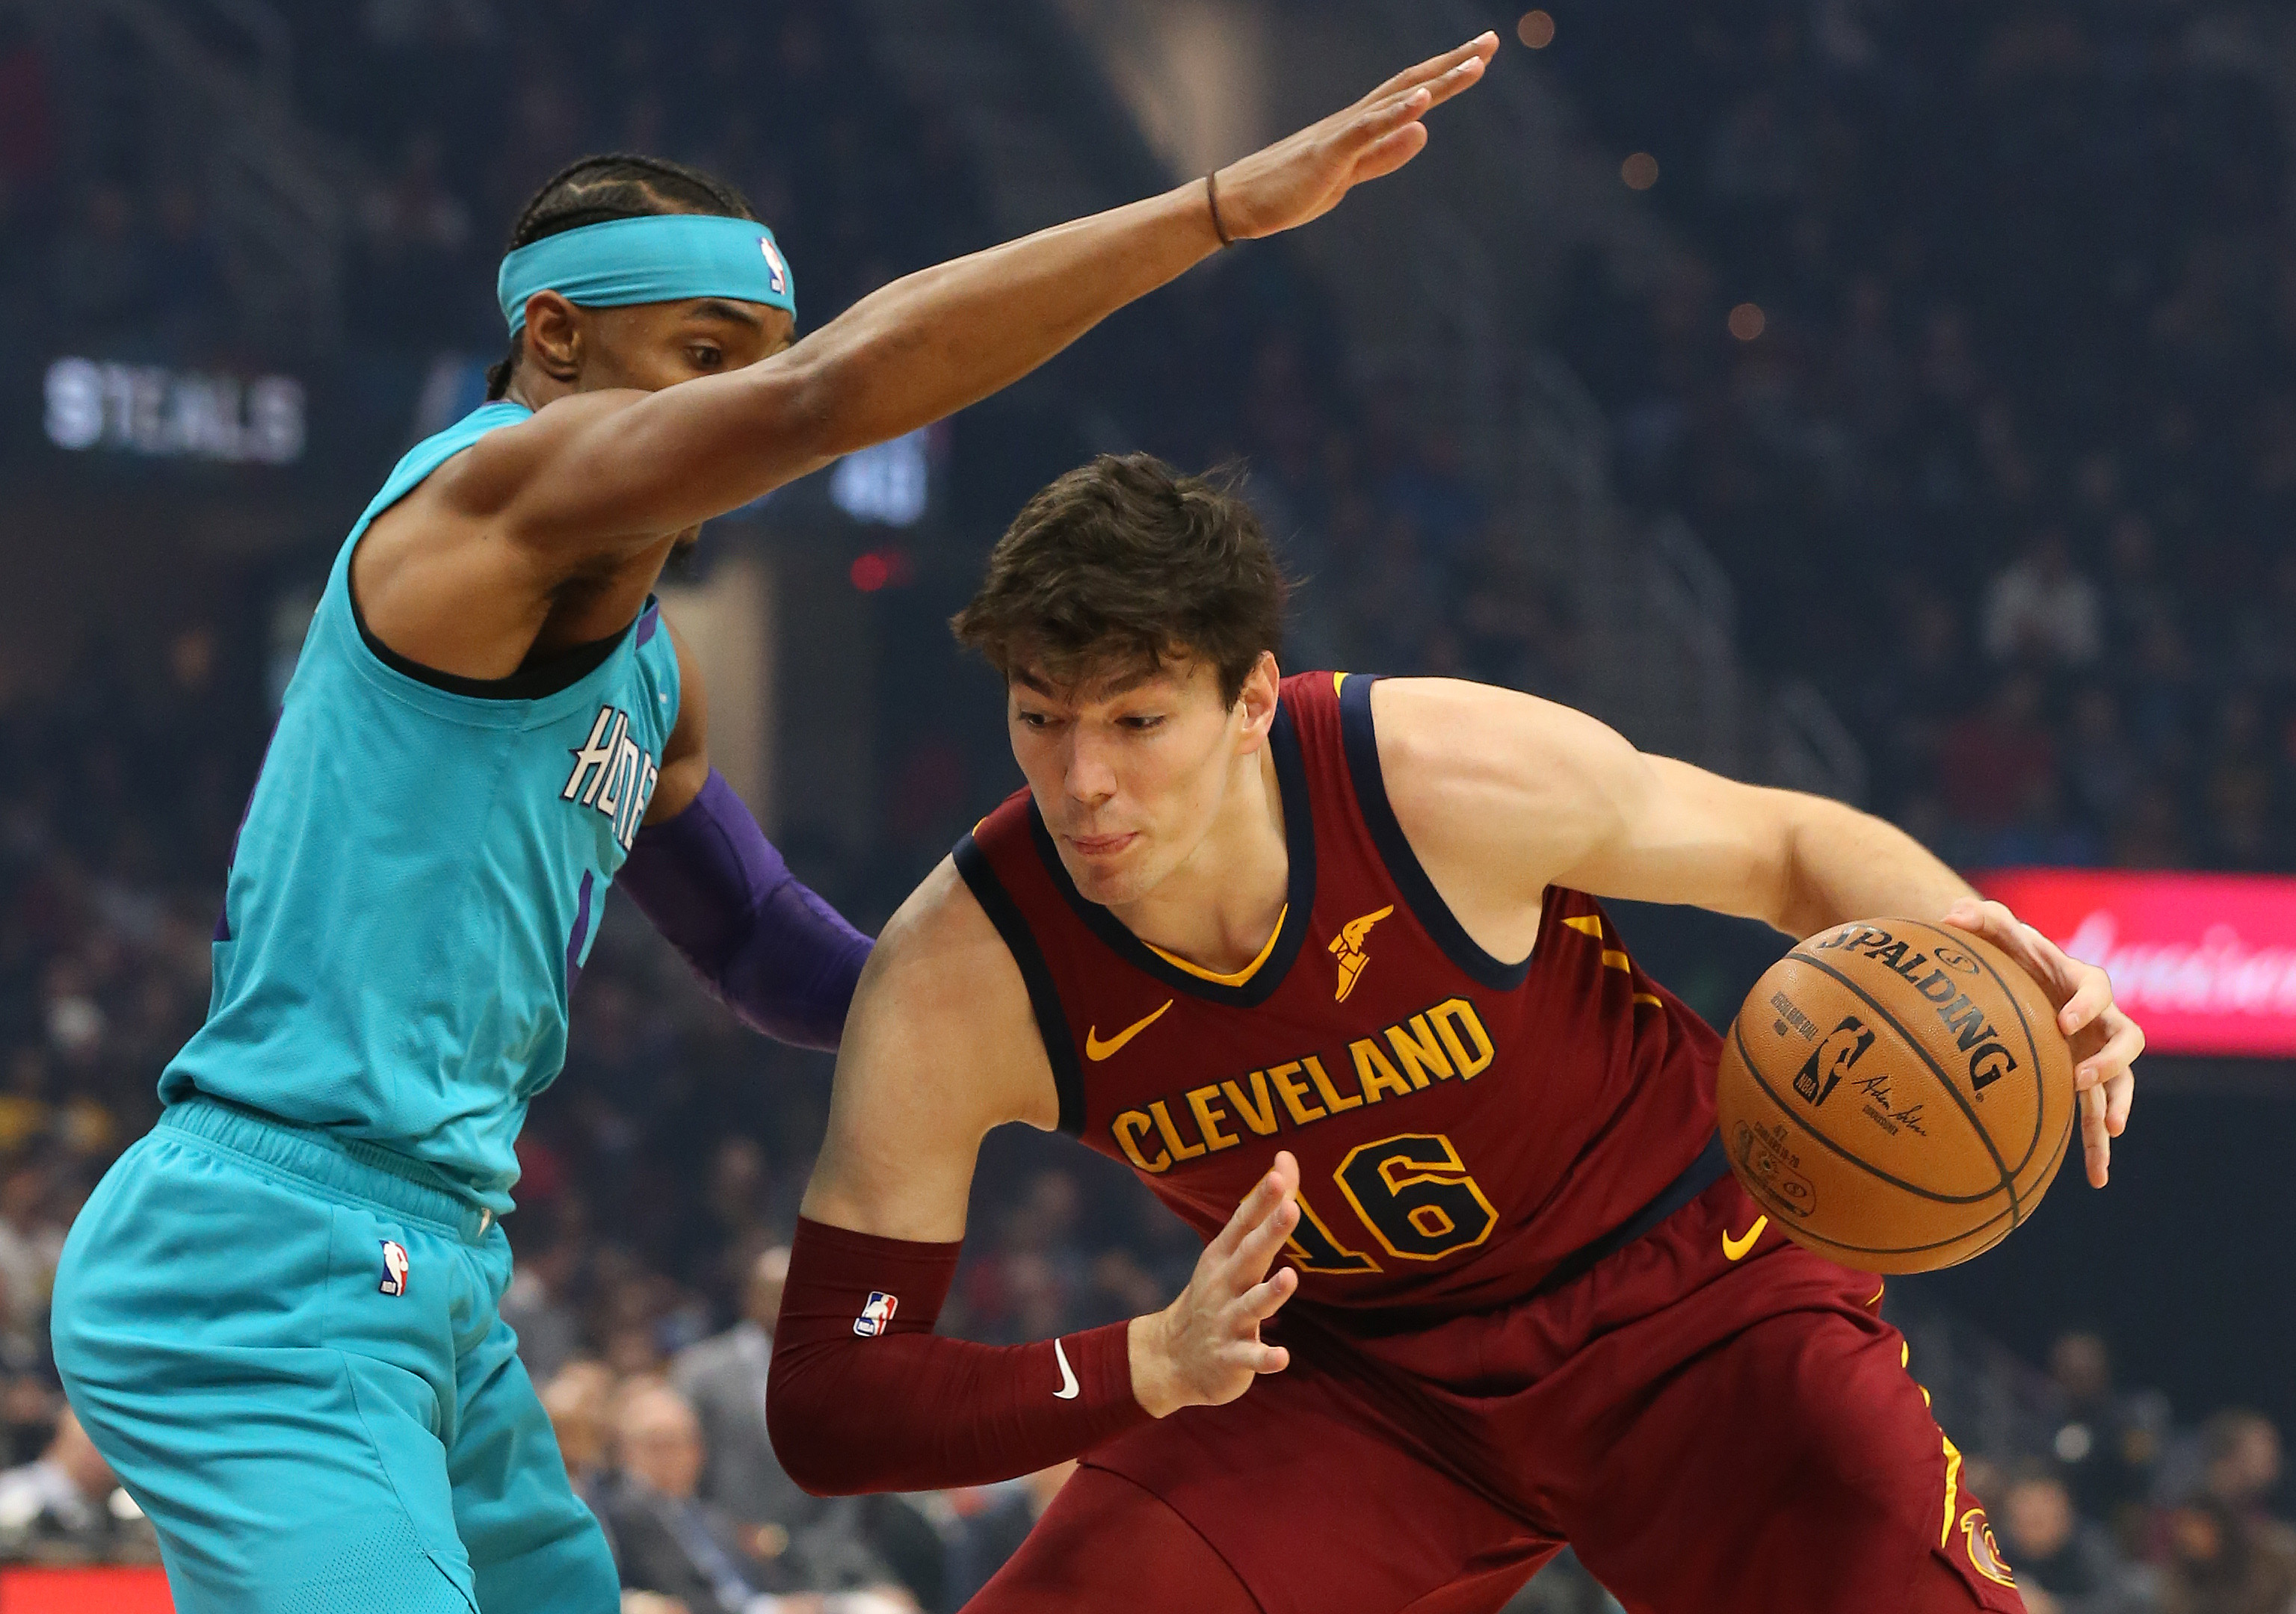 Cleveland Cavaliers vs Charlotte Hornets, Sports matchup, Game highlights, Basketball action, 3080x2160 HD Desktop